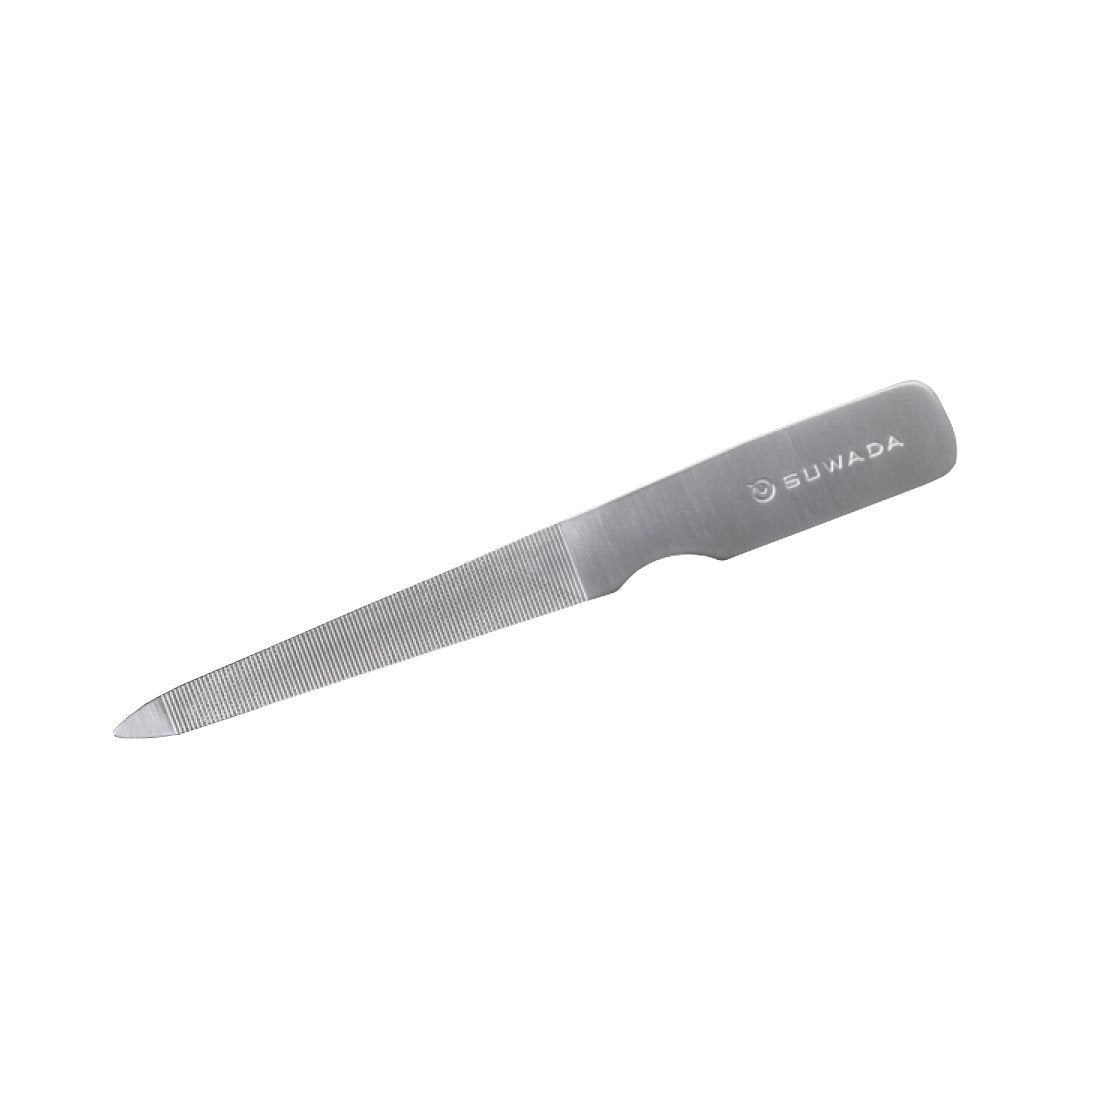 DOVO 407 045 Heavy Duty Stainless Steel Nail File 3-1/2